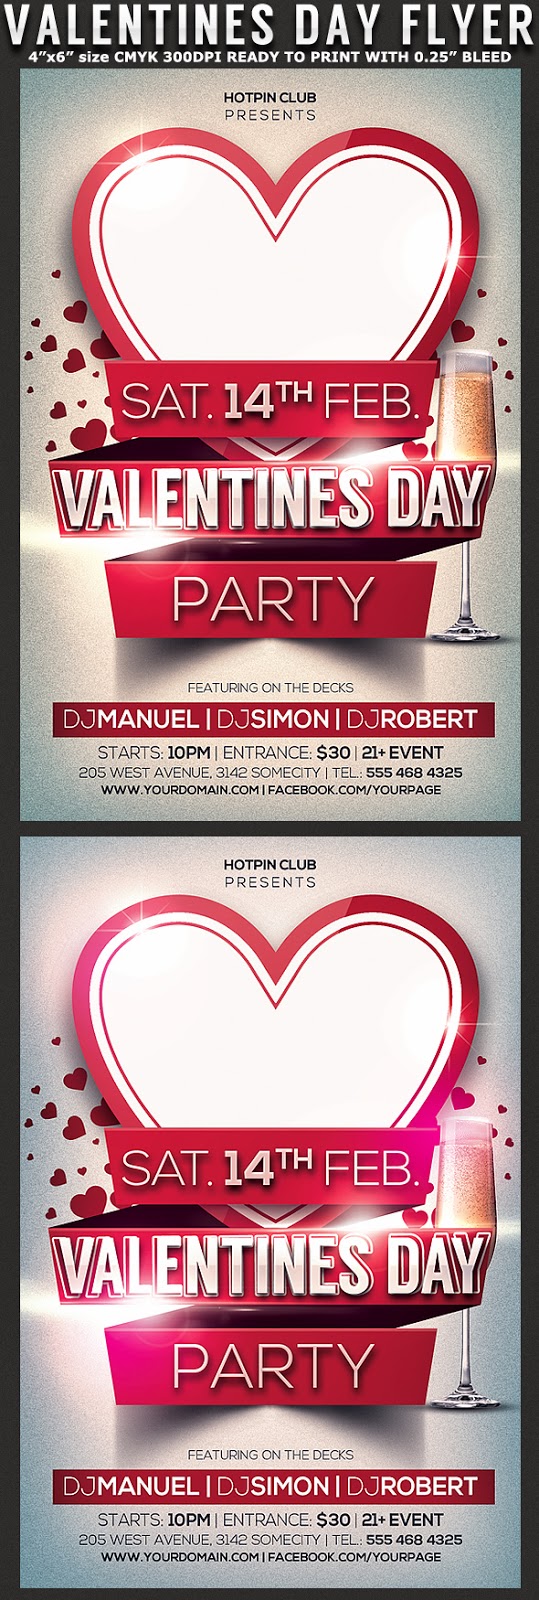  Valentines Day Party Flyer Template